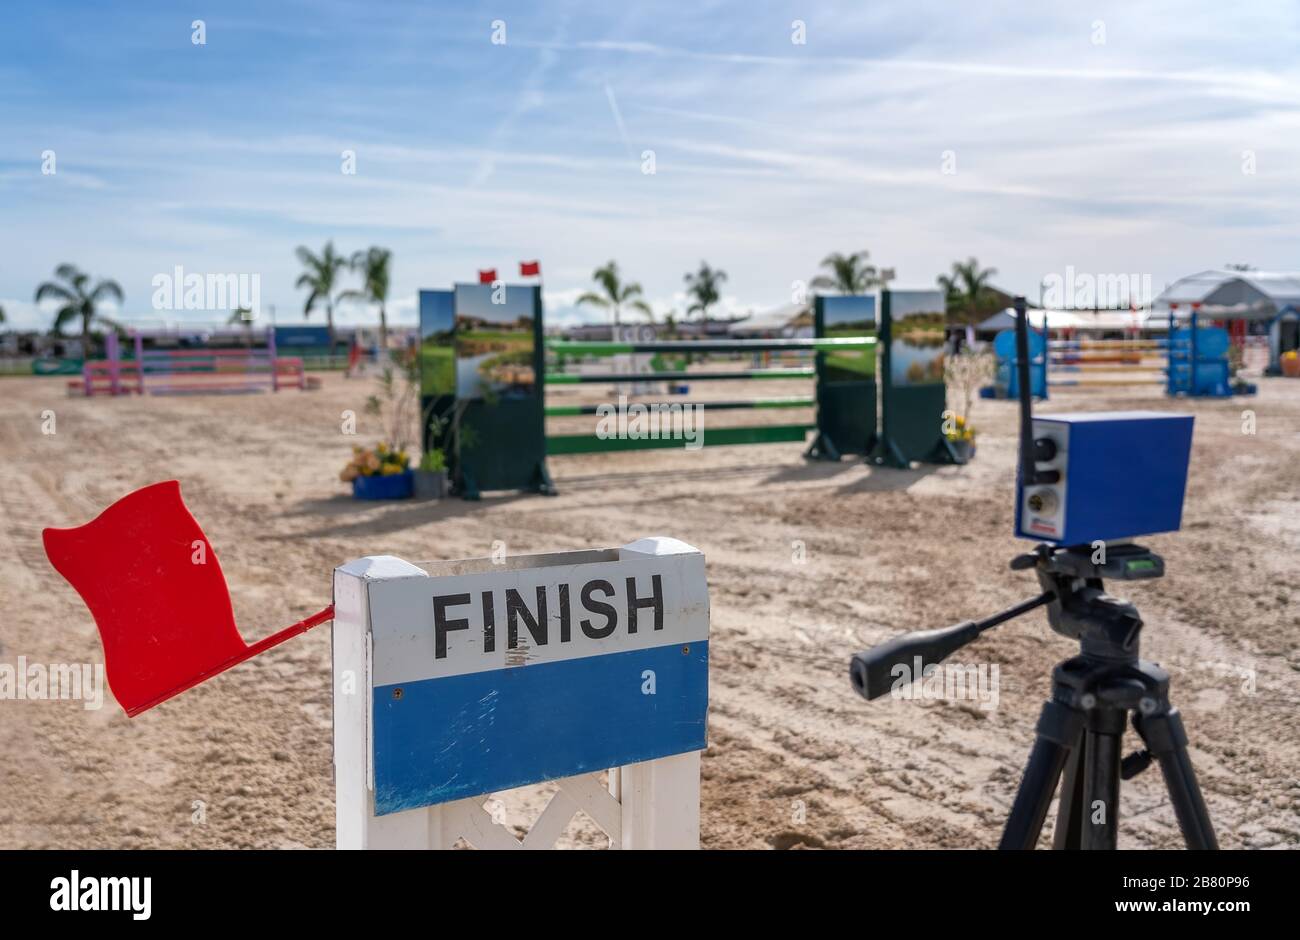 A device with a red flag for registering the finish line in equestrian racing at the racetrack Stock Photo